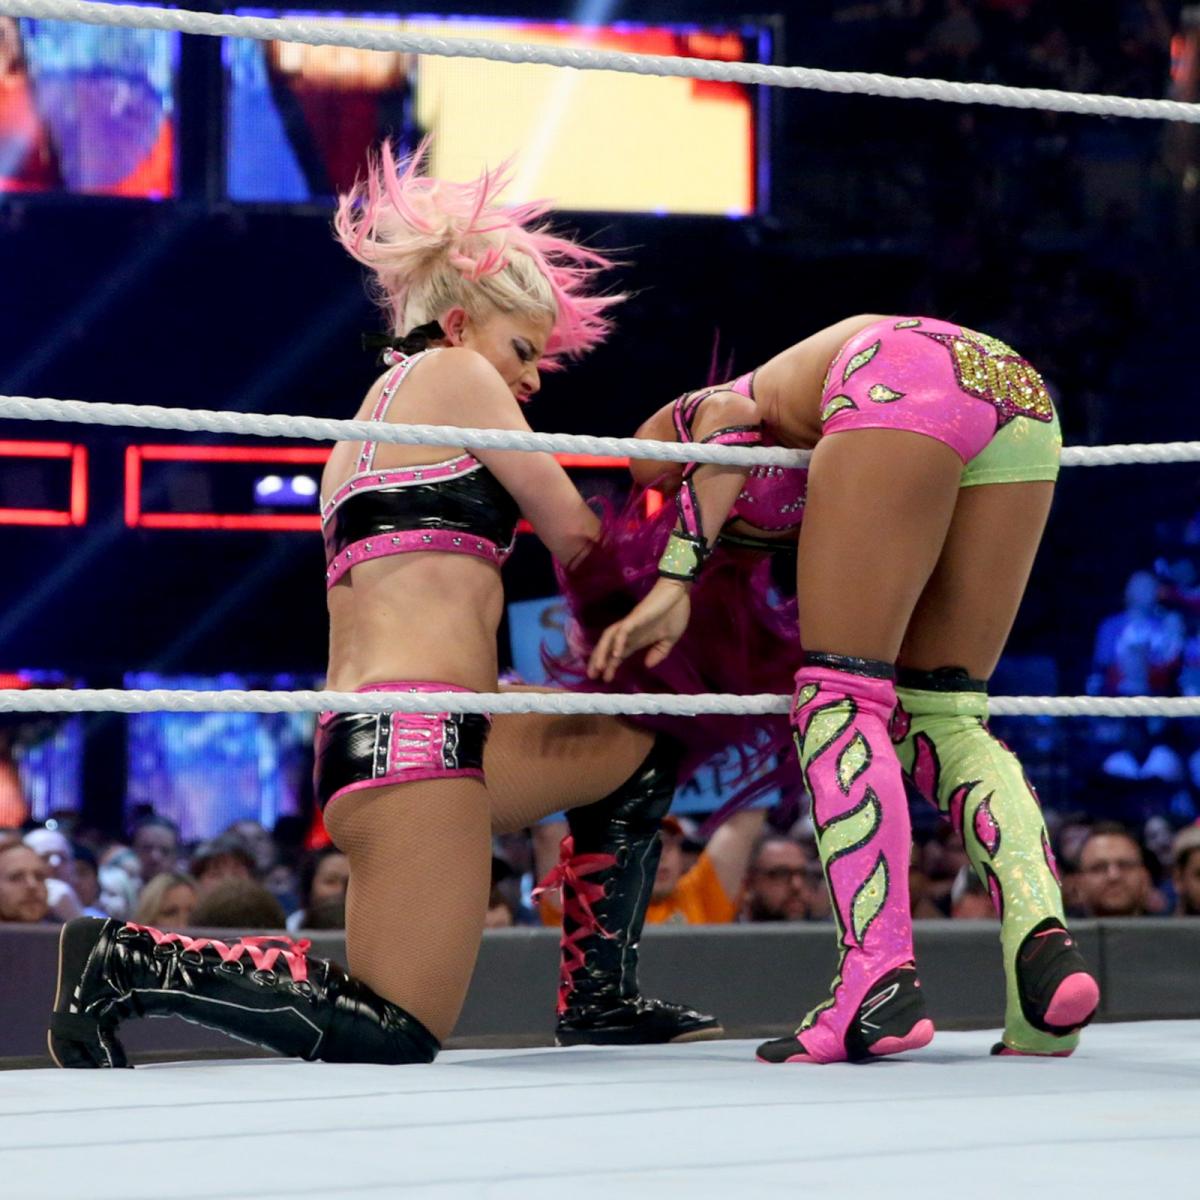 Don't worry y'all... Alexa is just showing Sasha her boots. Friendship goals!! 